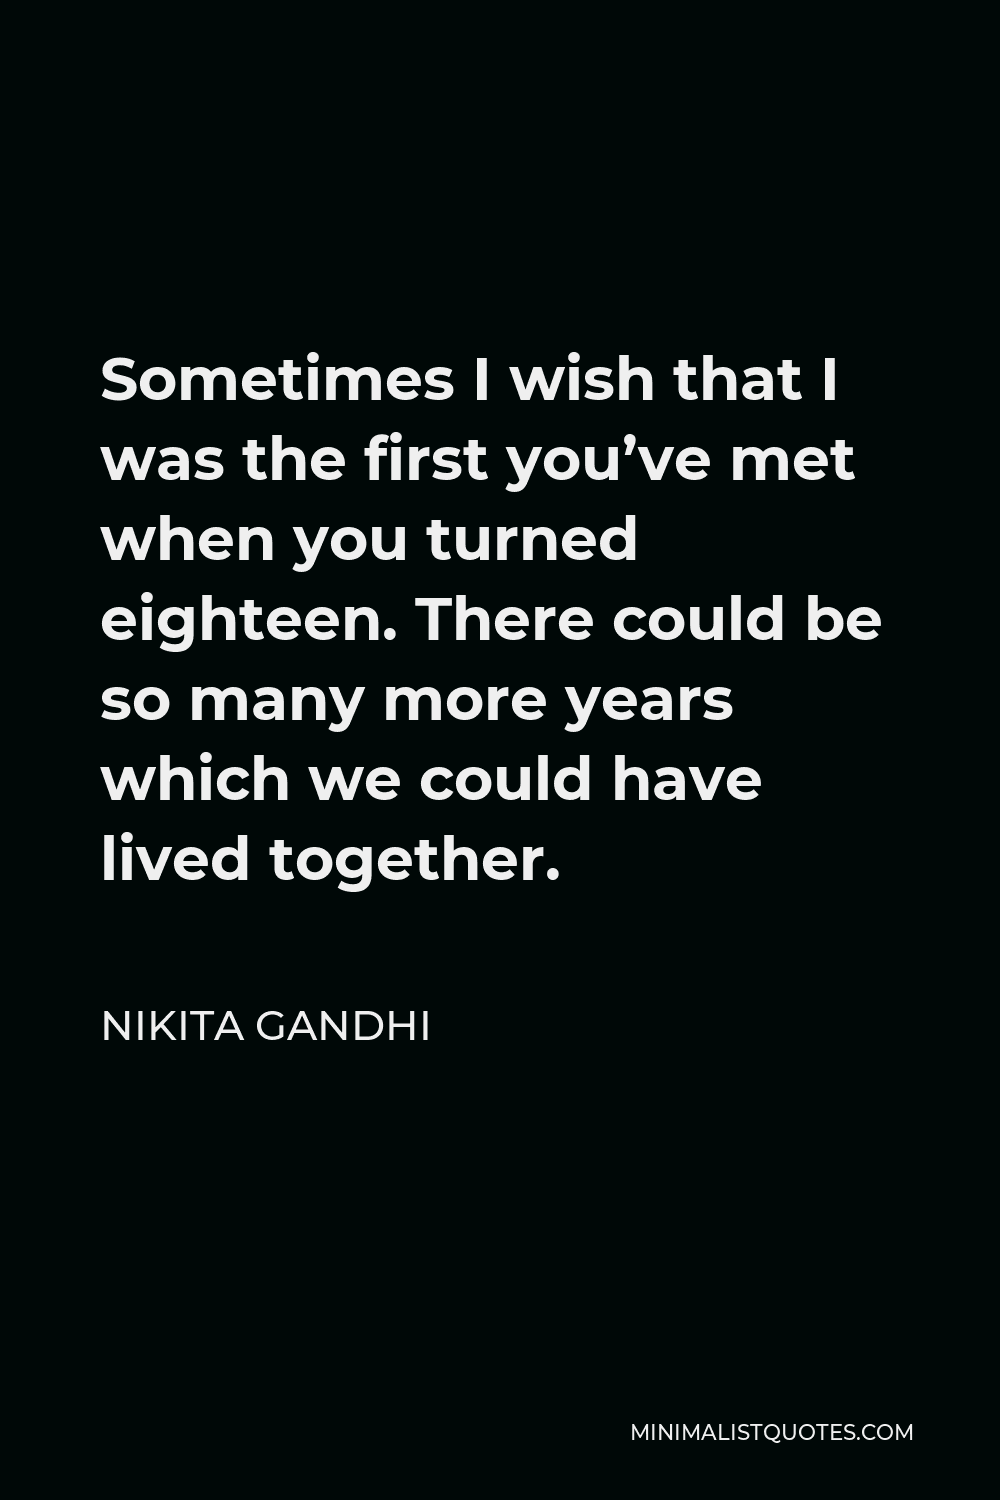 Nikita Gandhi Quote - Sometimes I wish that I was the first you’ve met when you turned eighteen. There could be so many more years which we could have lived together.